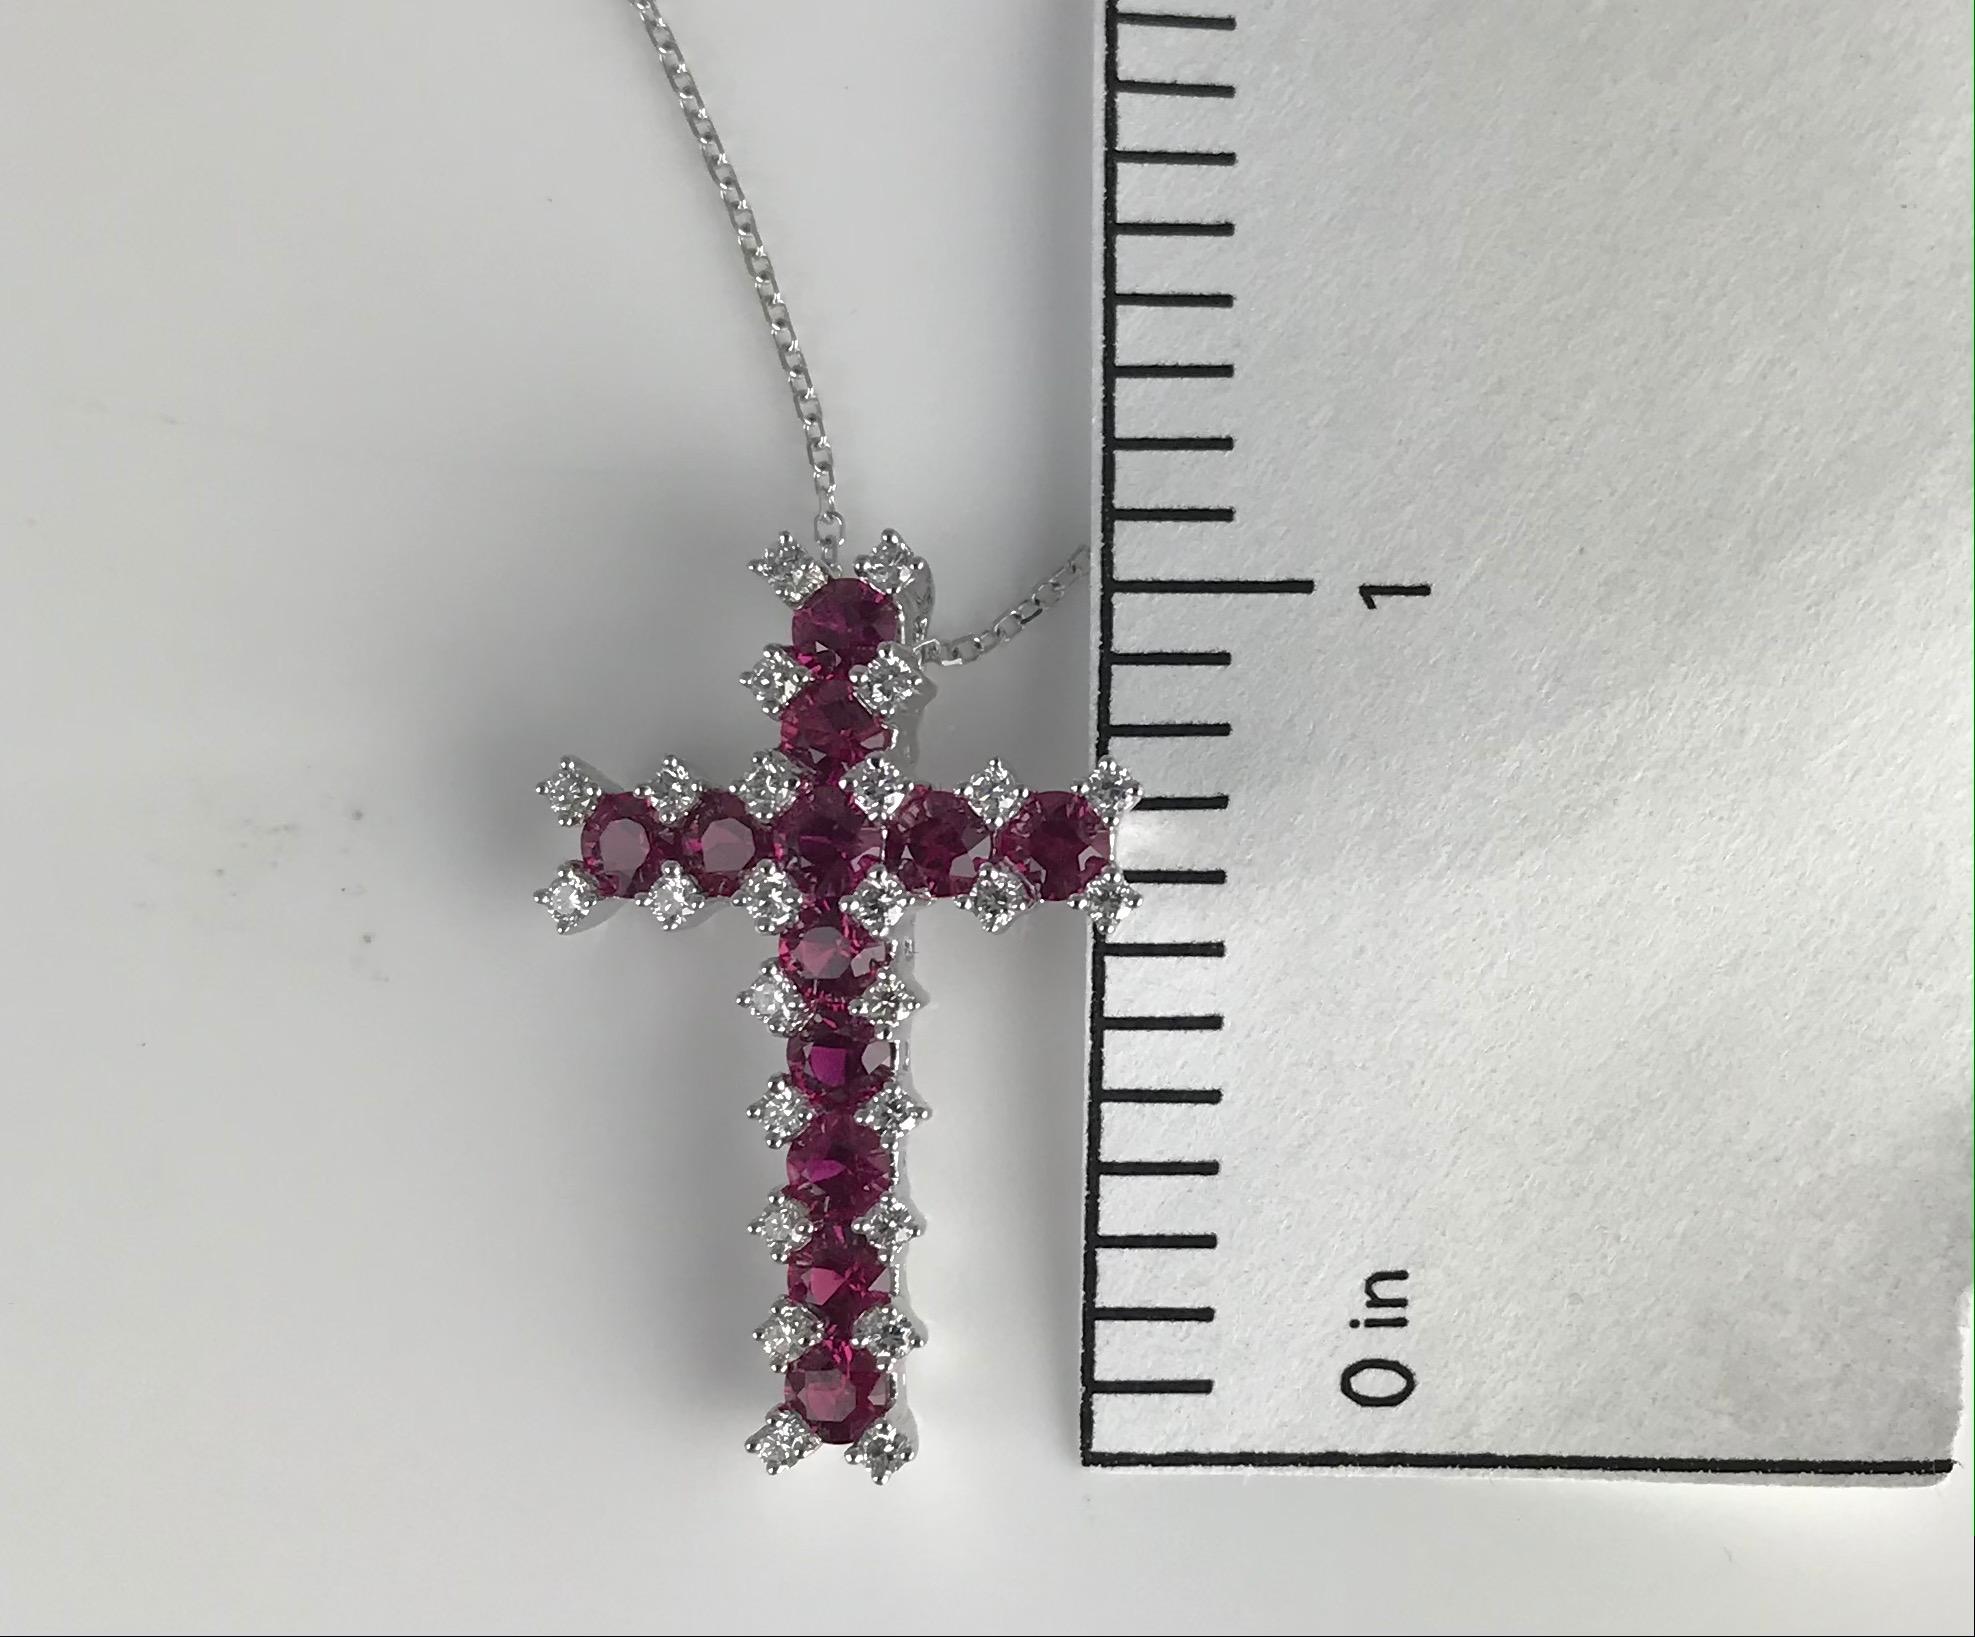 At the heart of this cross pendant, you'll find a dozen round rubies, totaling 1.52 carats. Rubies are known as the gemstone of love and passion, and their deep, velvety red hue is a testament to these sentiments. They add a touch of warmth and